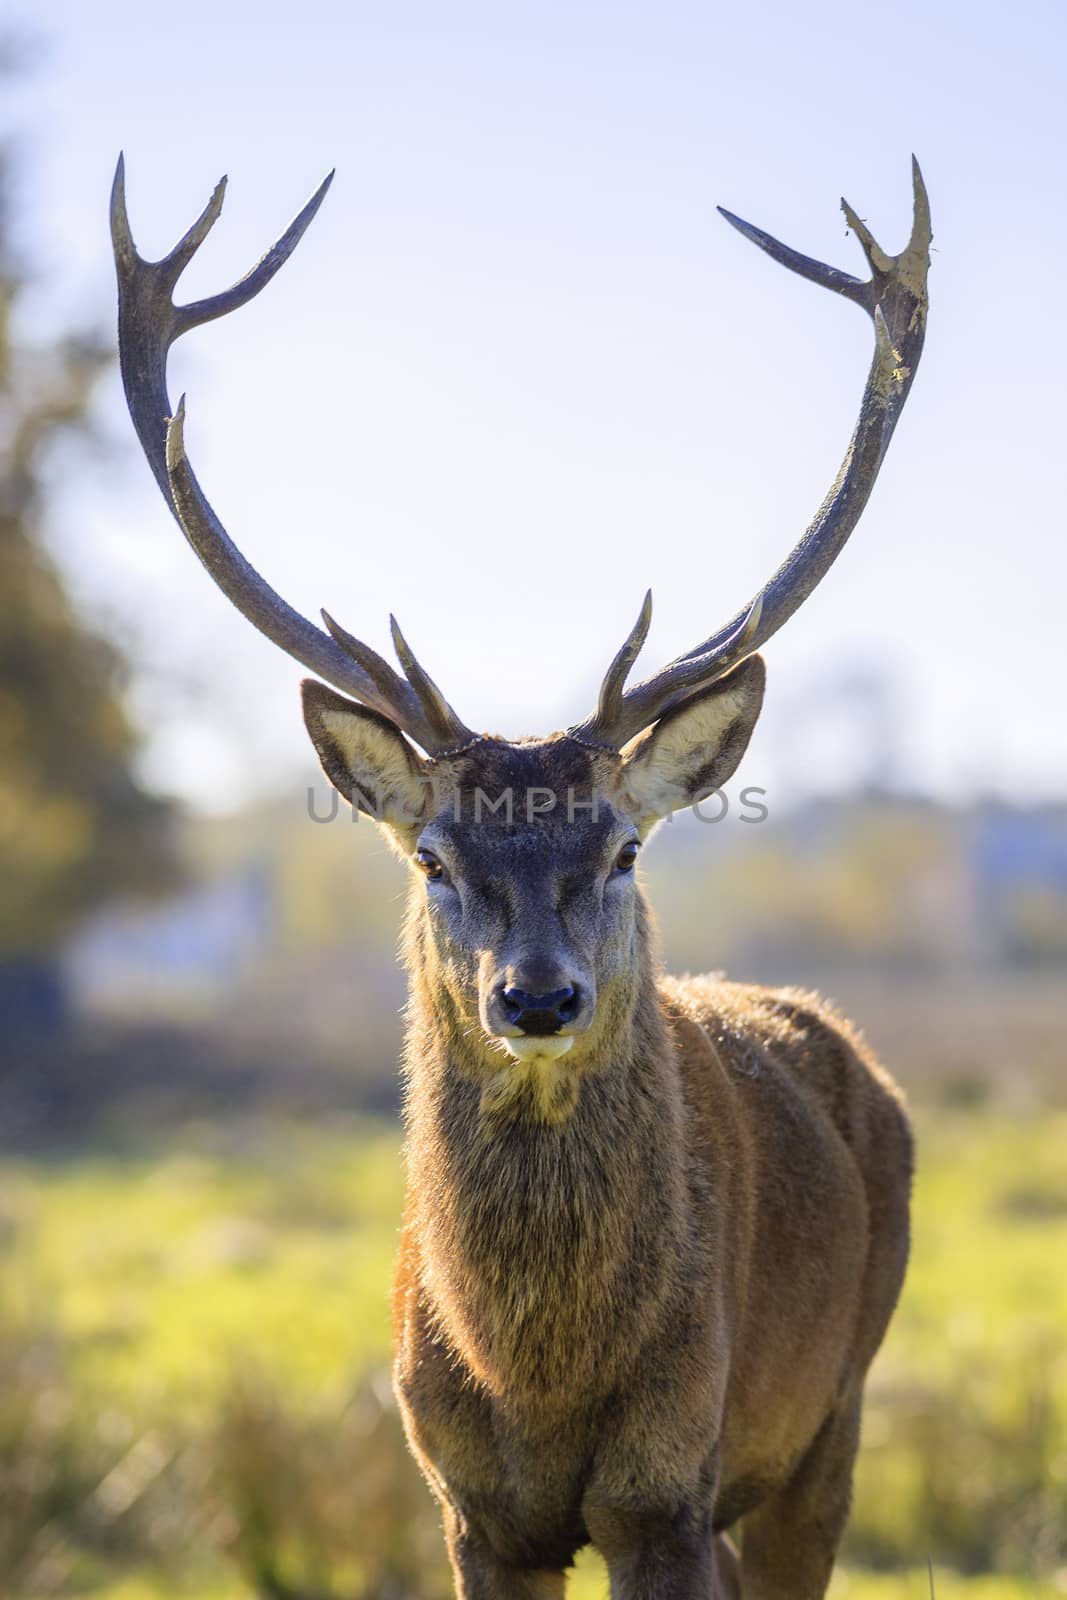 majestic powerful adult red deer by vwalakte